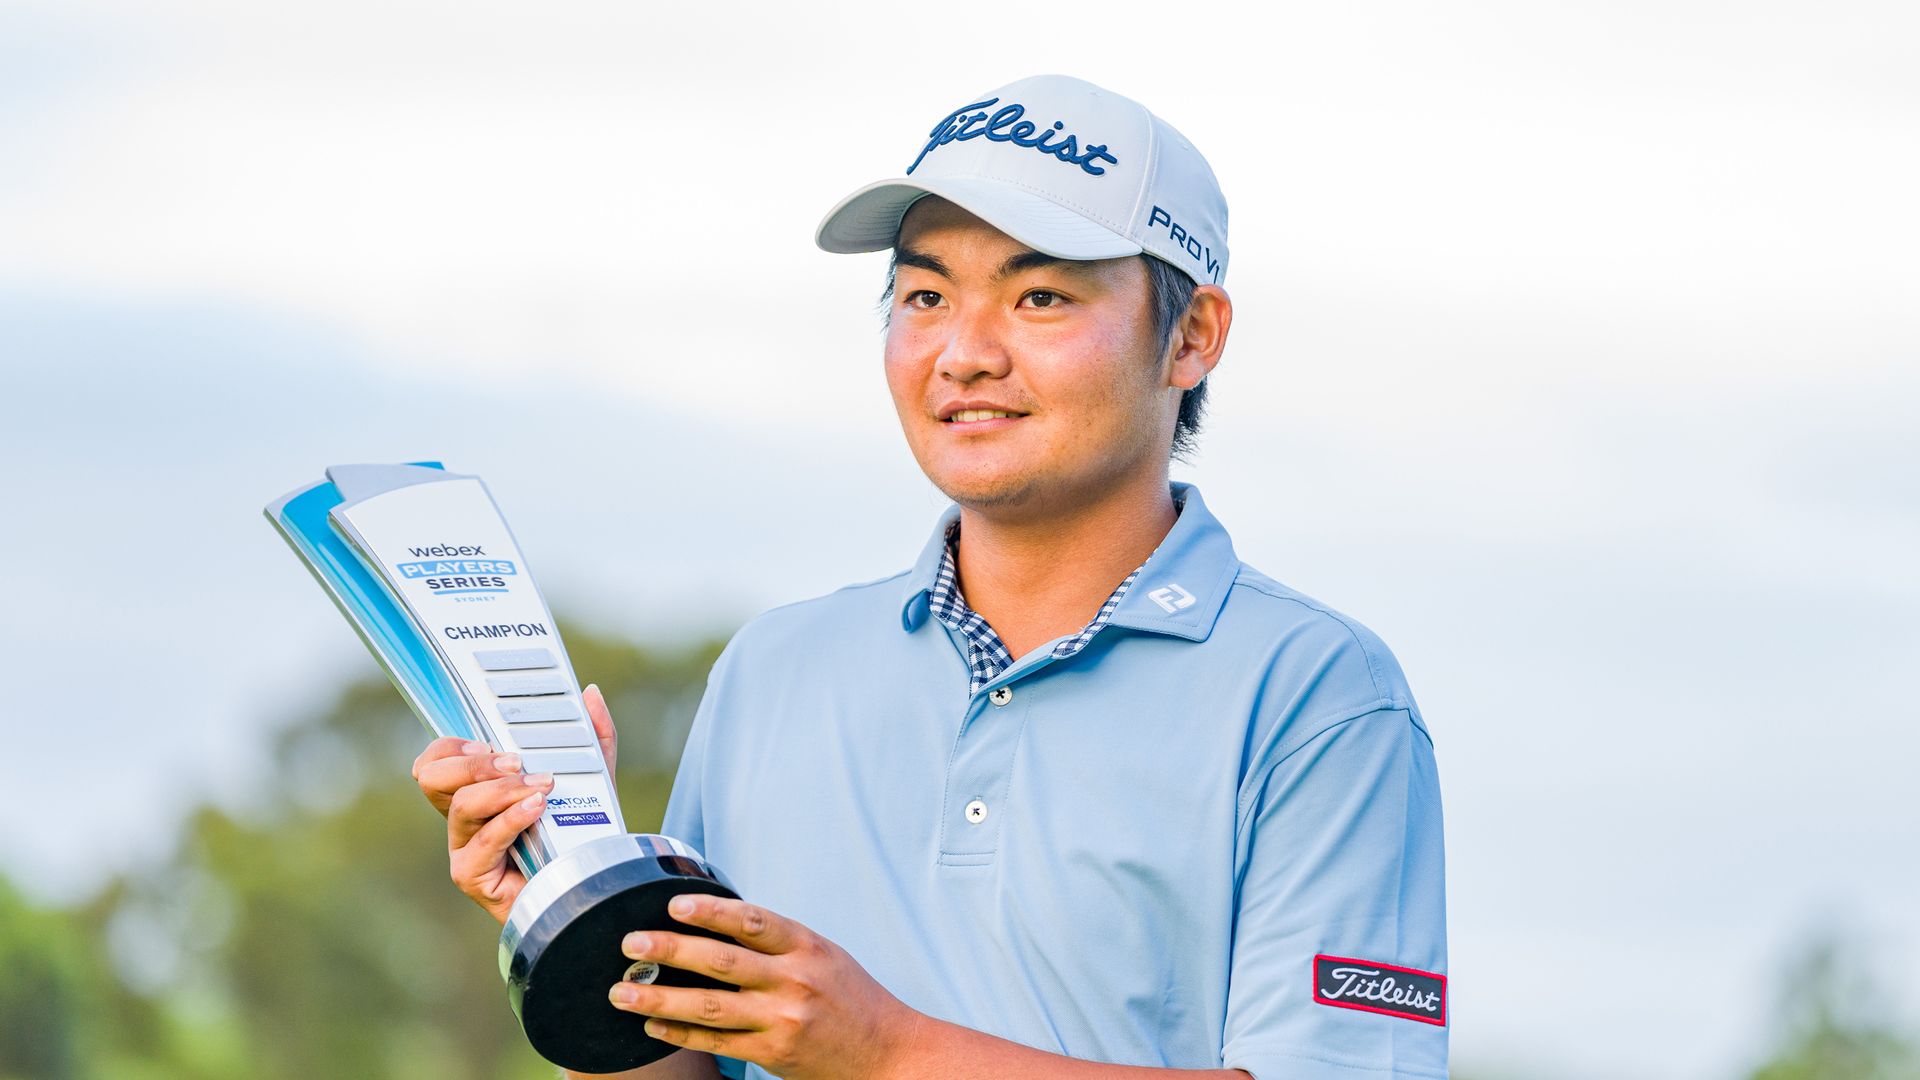 meet the 22-year-old new zealander who just matched a tiger woods win record